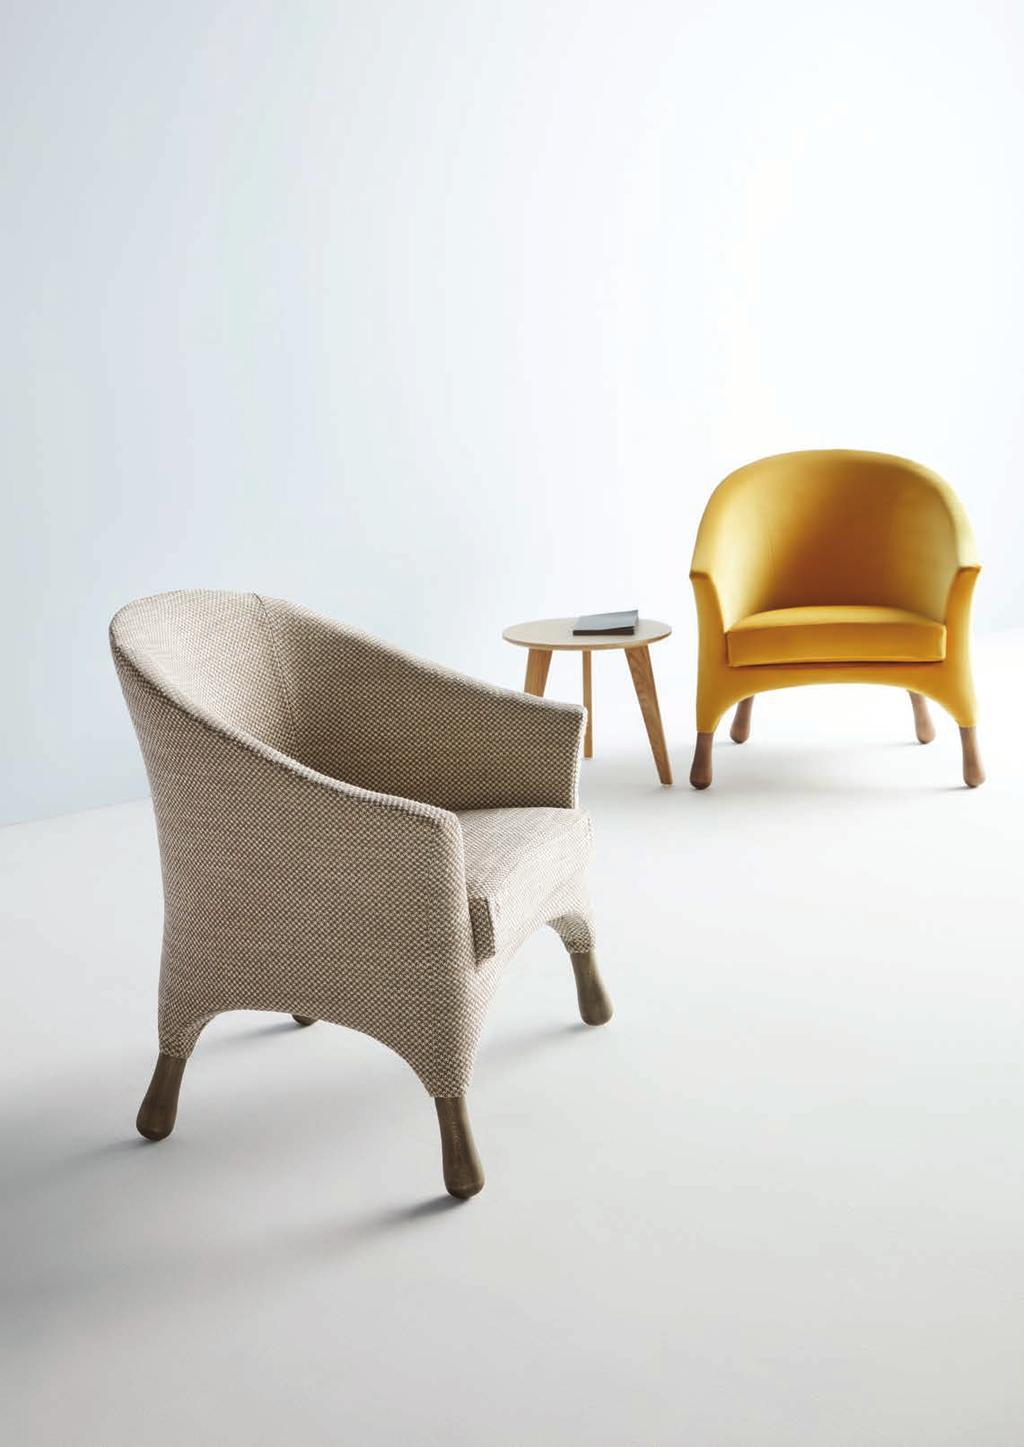 drops design by Andreas Varotsos The difference is often arised by a detail and the armchair Drops base confirms absolutely